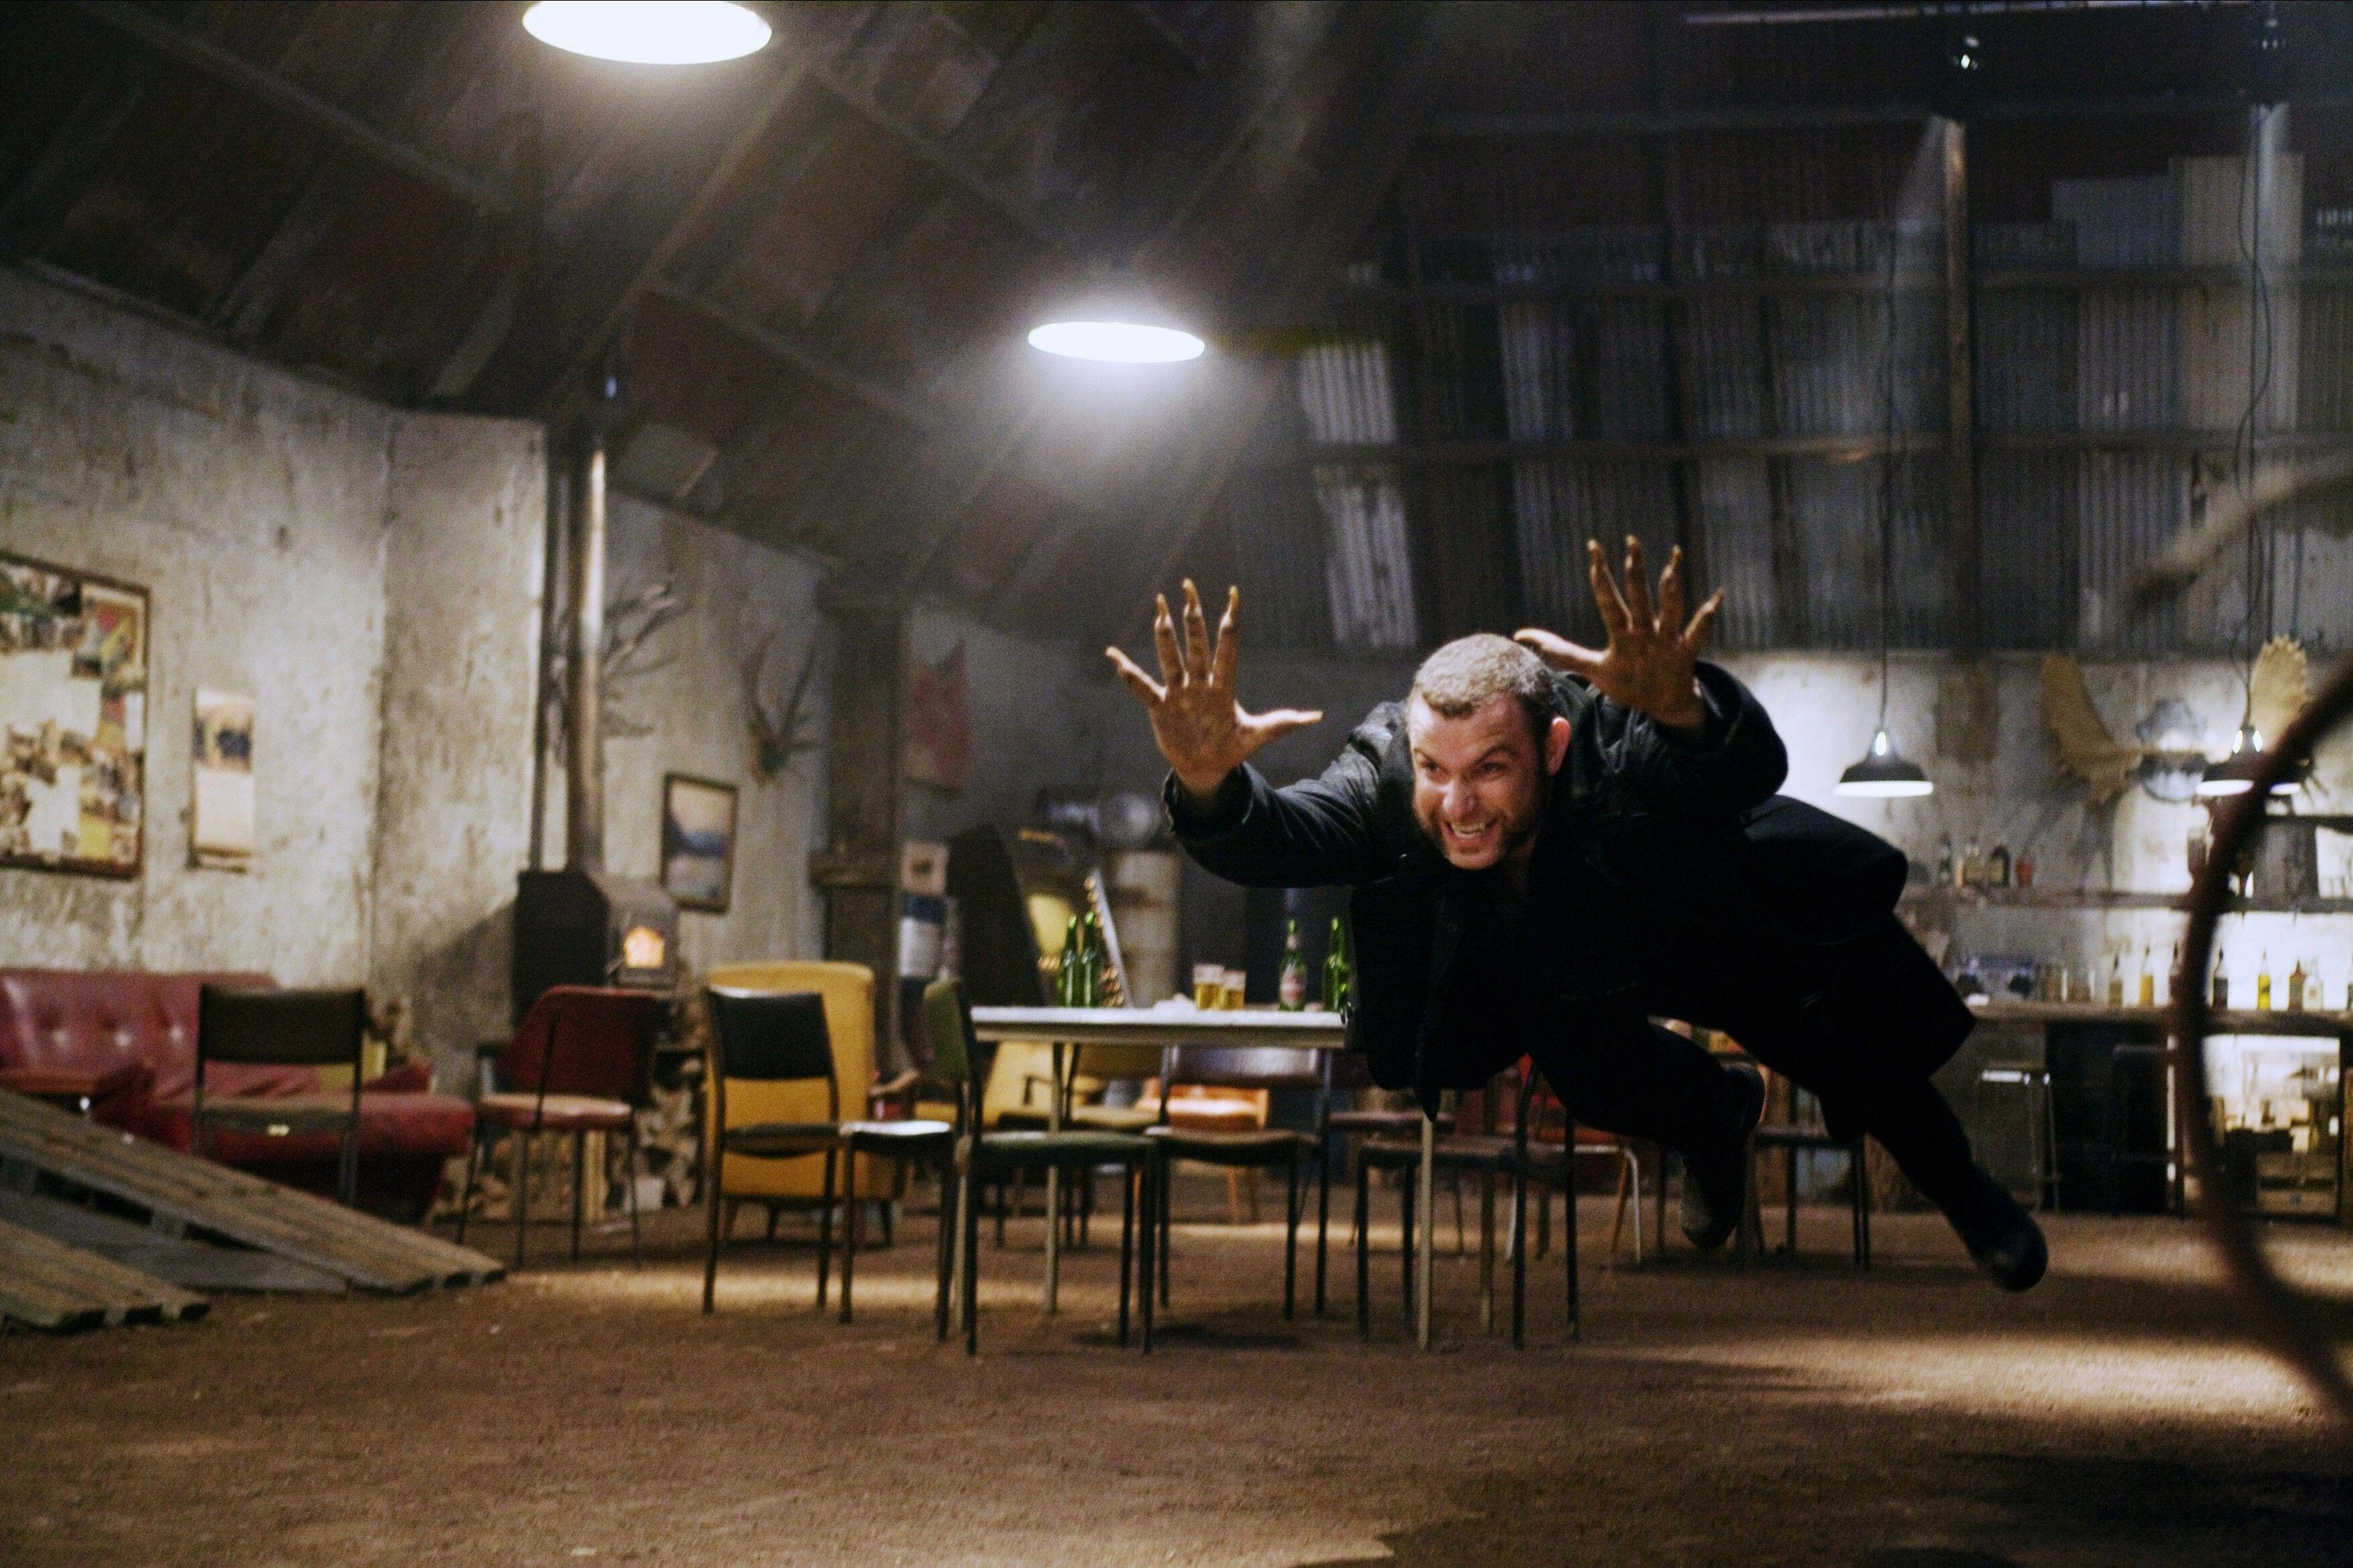 Sabretooth leaps in a rage in an empty bar in &quot;X-Men Origins: Wolverine&quot;